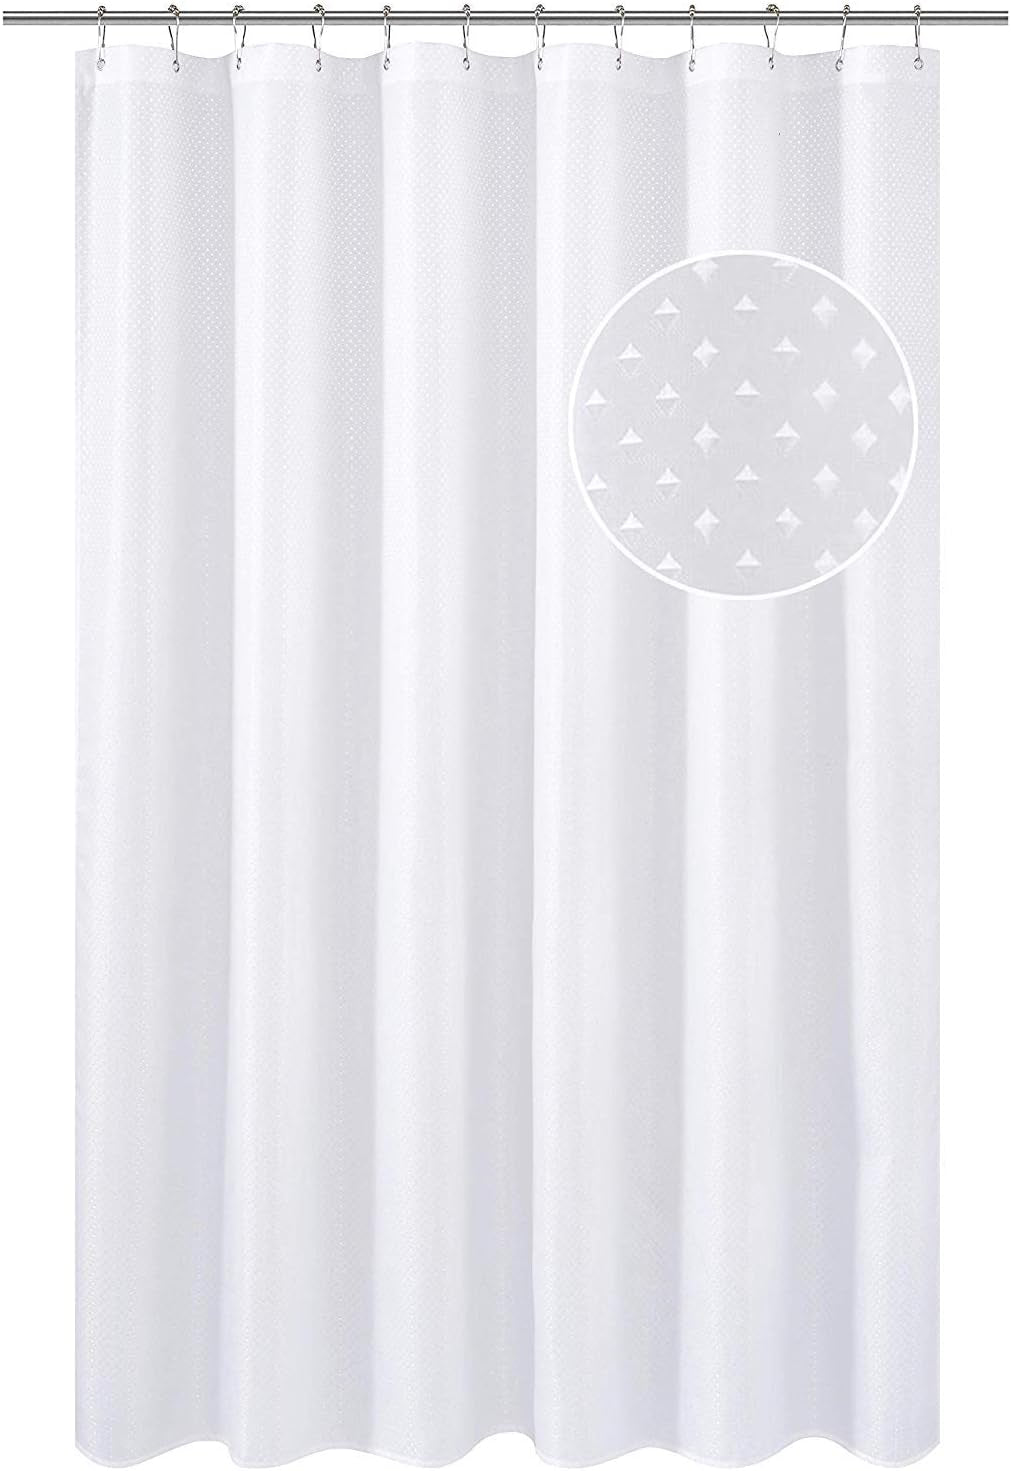 N&Y HOME Fabric Clawfoot Tub Shower Curtain 180 X 70 Inches All Wrap Around, 36 Hooks Included, Hotel Quality, Washable, Water Repellent, Diamond Pattern White Bathroom Curtains with Grommets